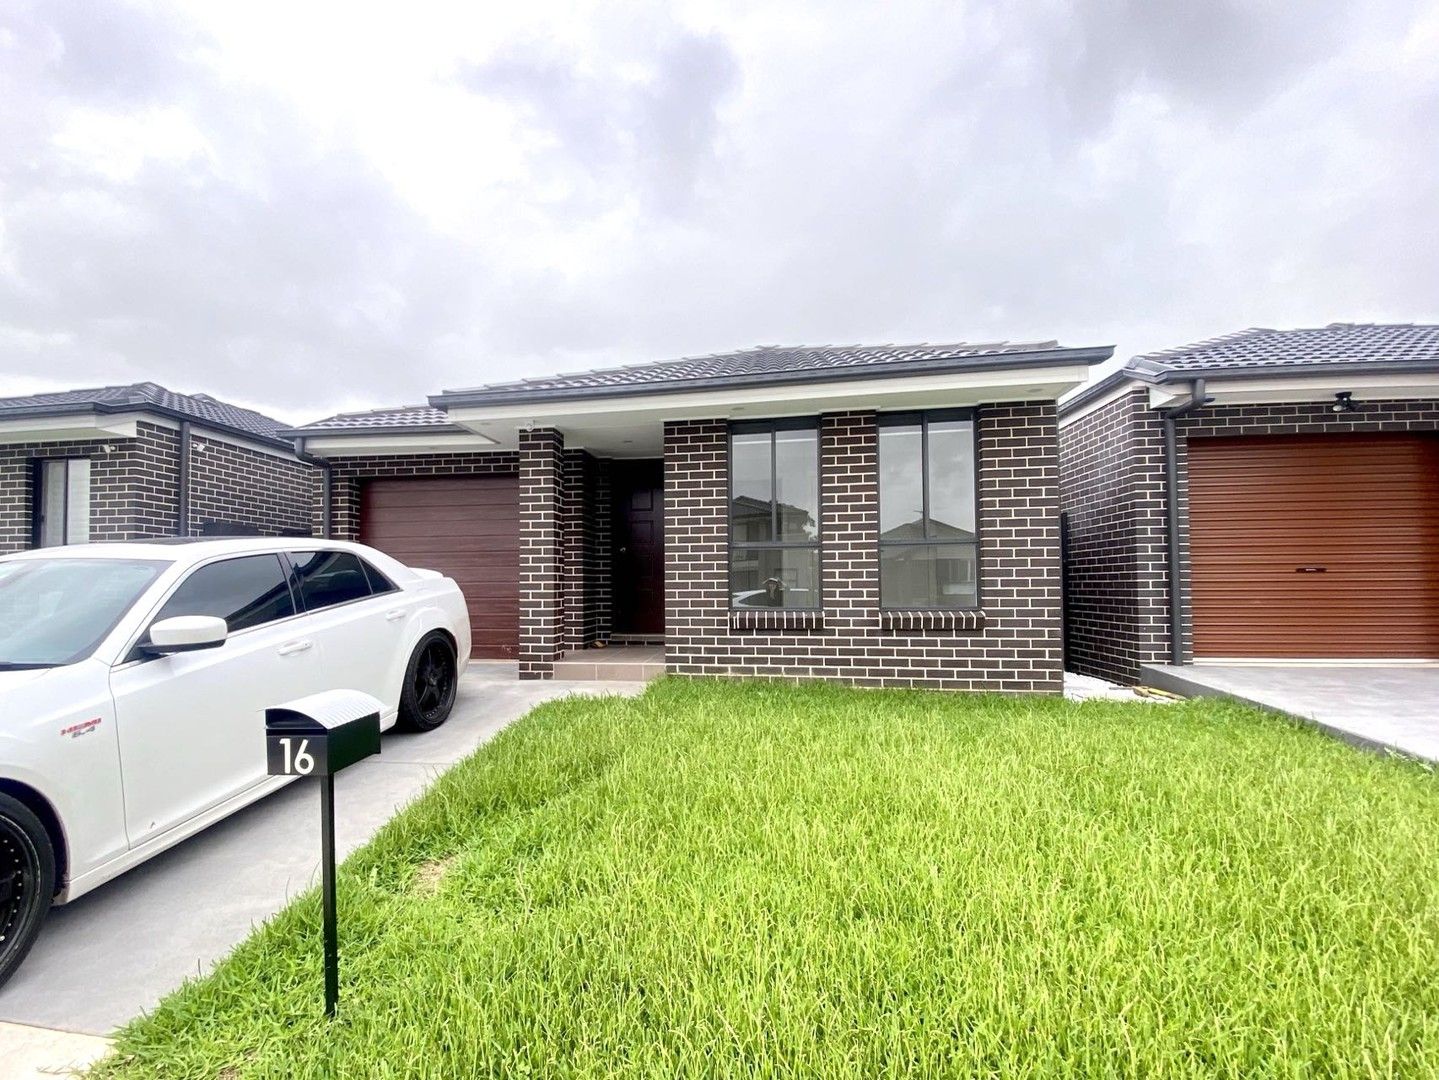 4 bedrooms House in 16 Cortina Avenue AUSTRAL NSW, 2179